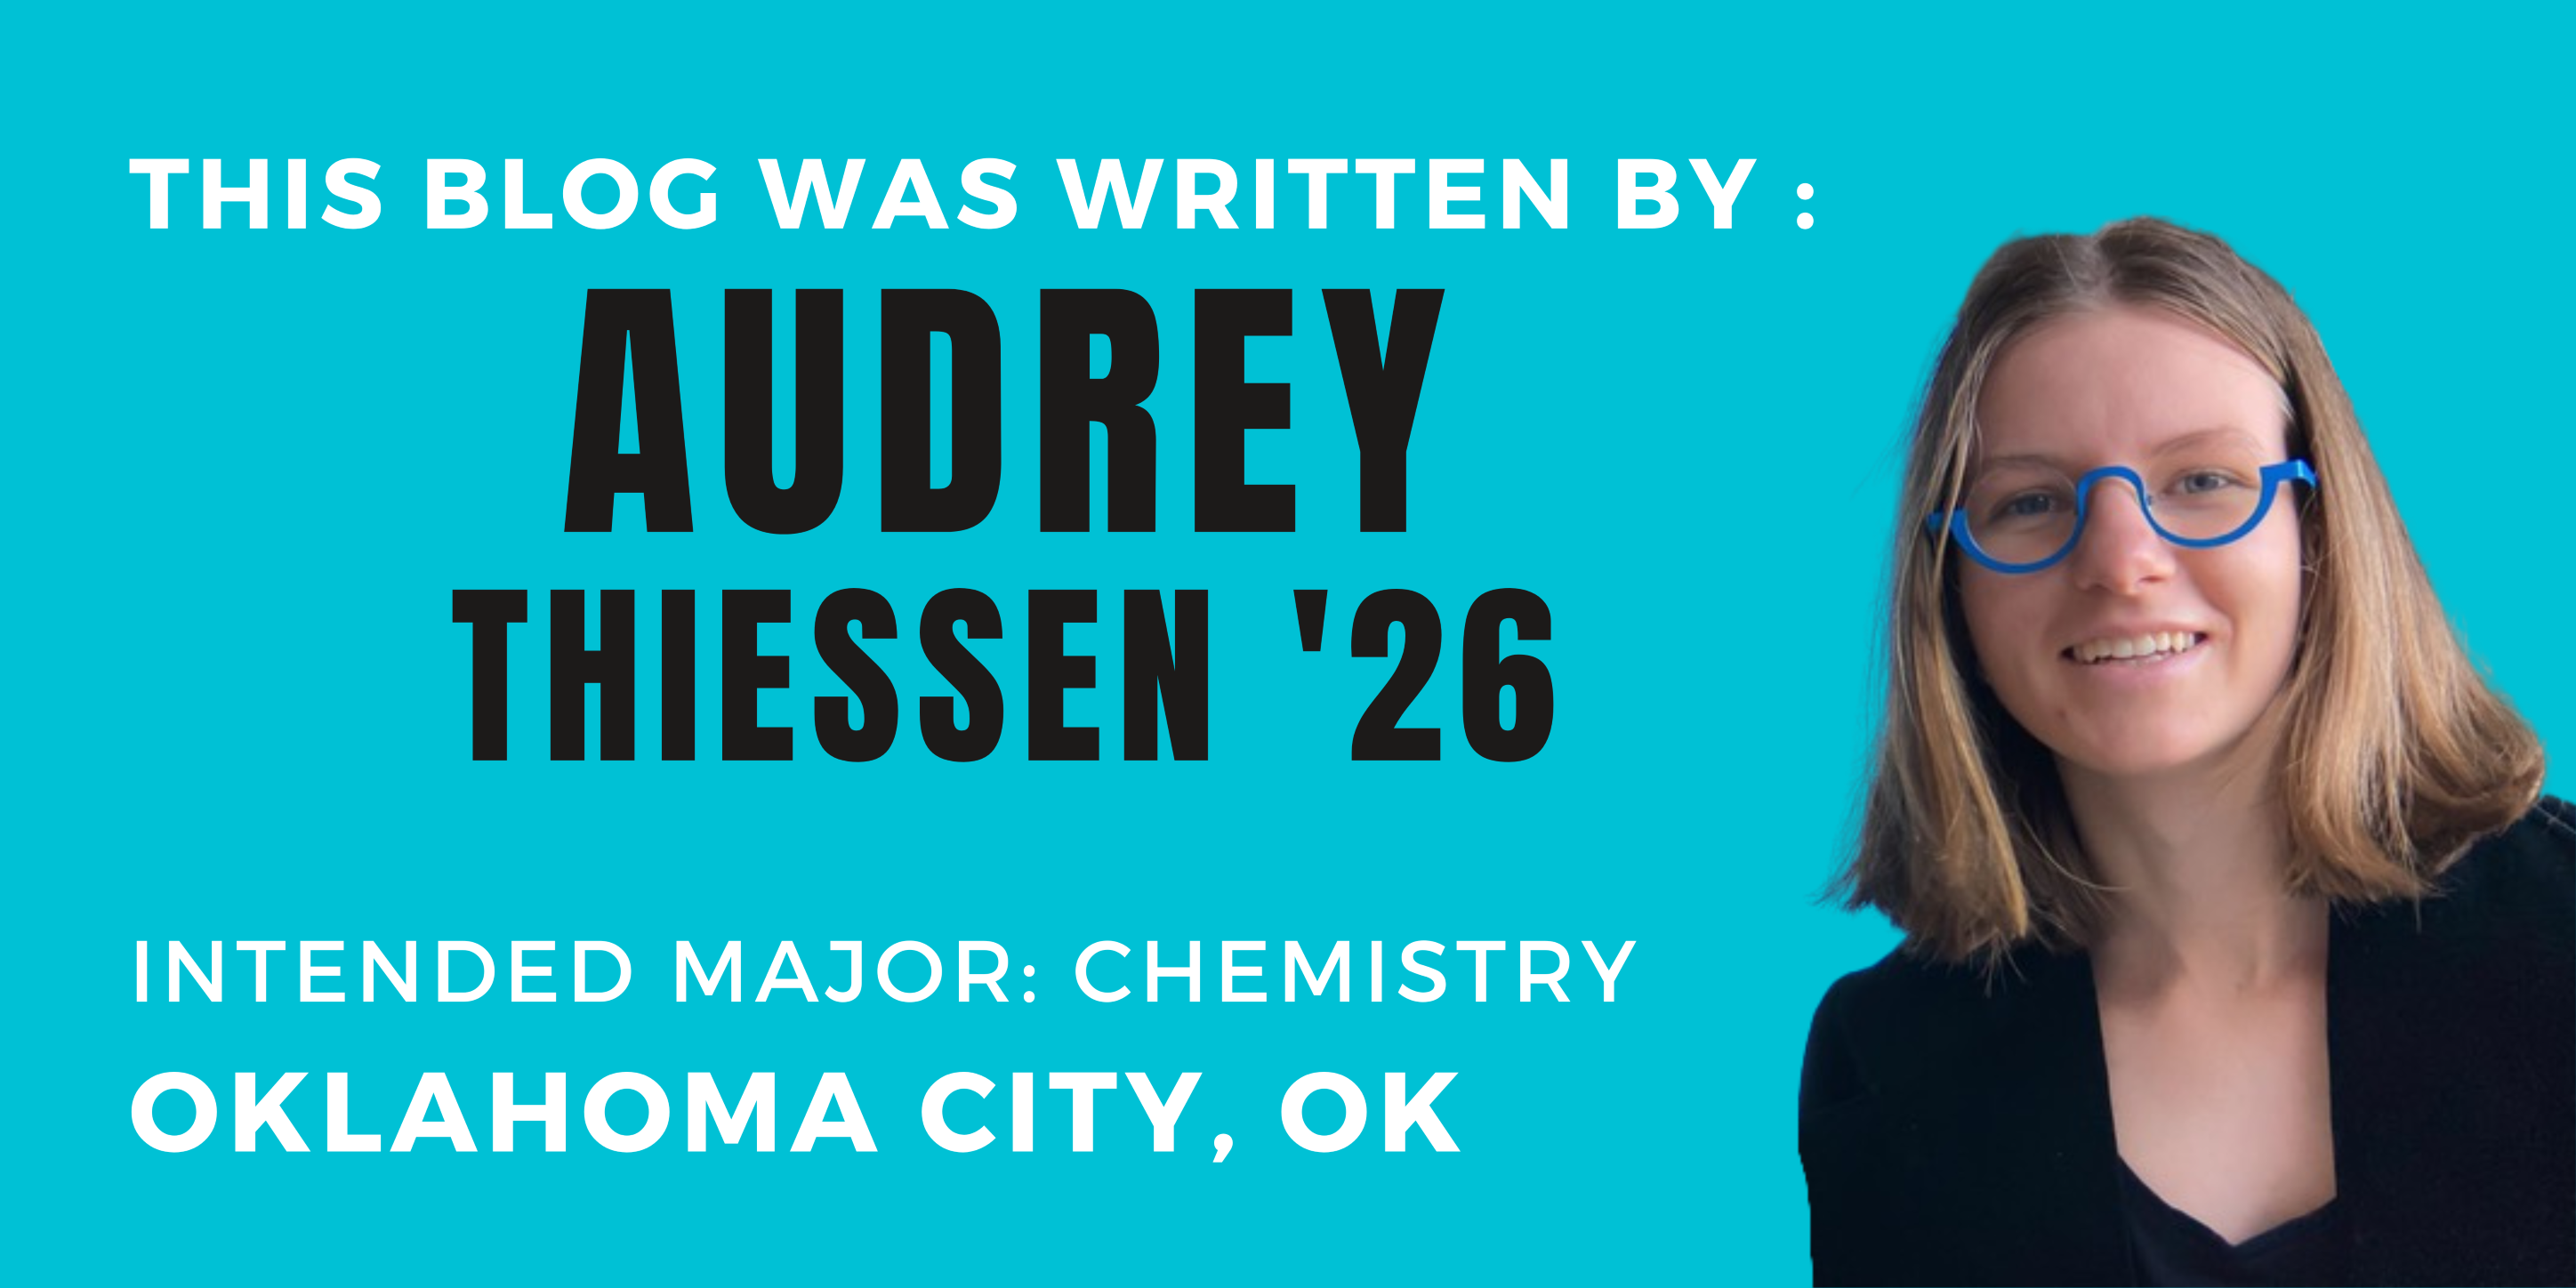 This blog was written by: Audrey Thiessen '26. Intended major: chemistry. Oklahoma City, OK.